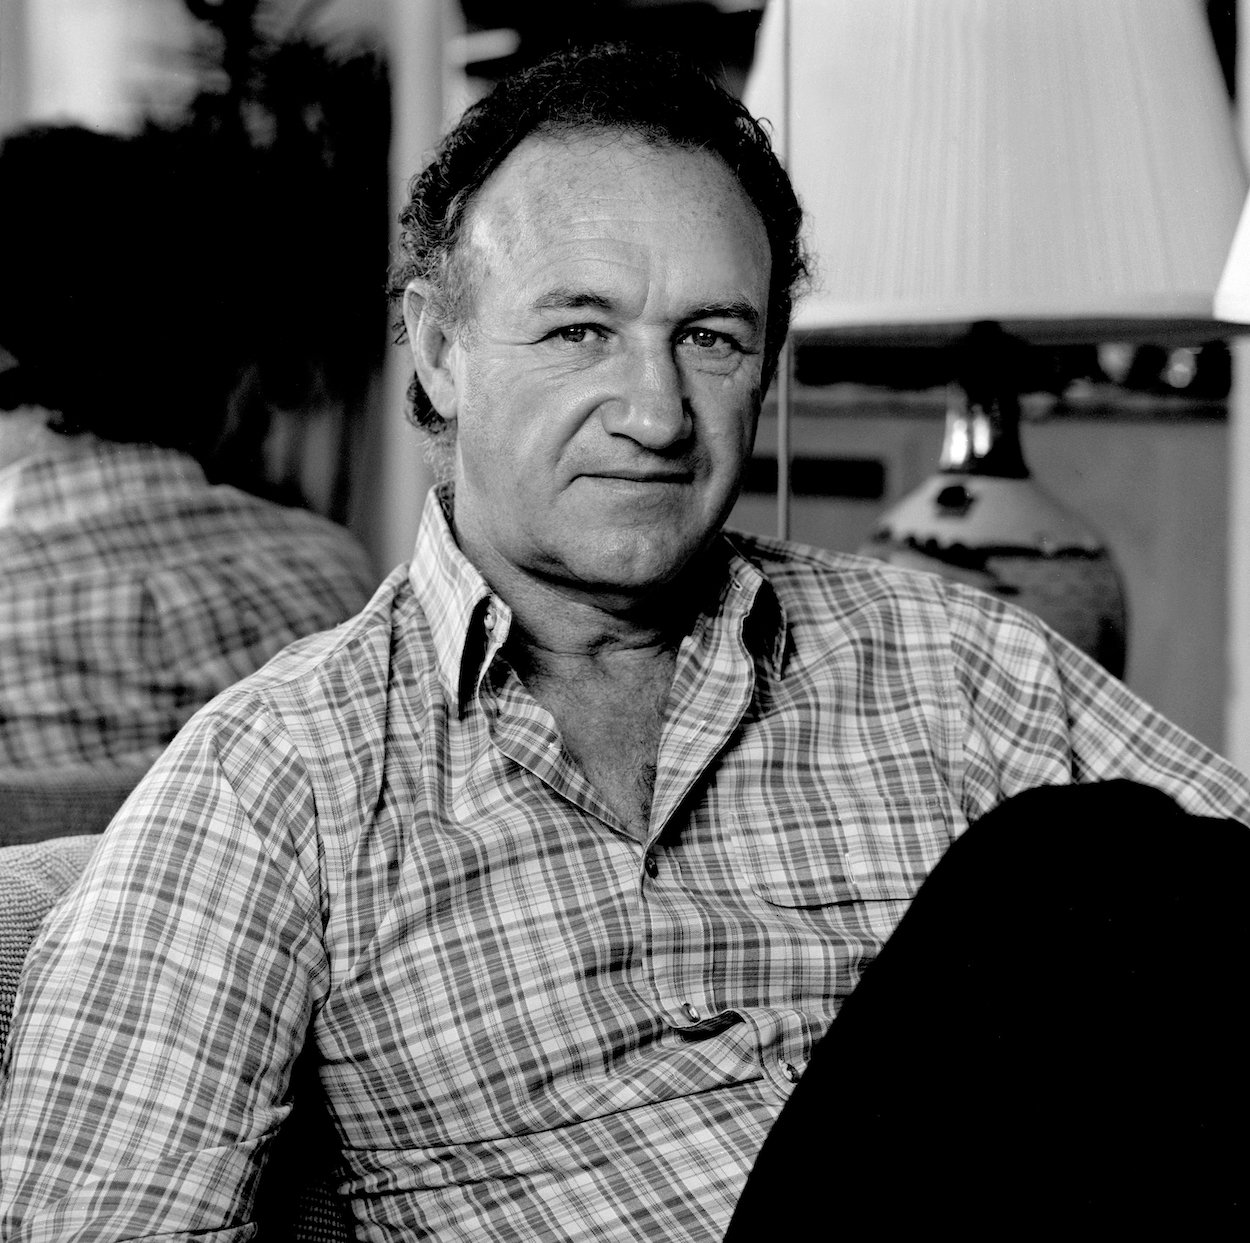 Gene Hackman, whose movie hero was James Cagney, in Chicago in 1985.